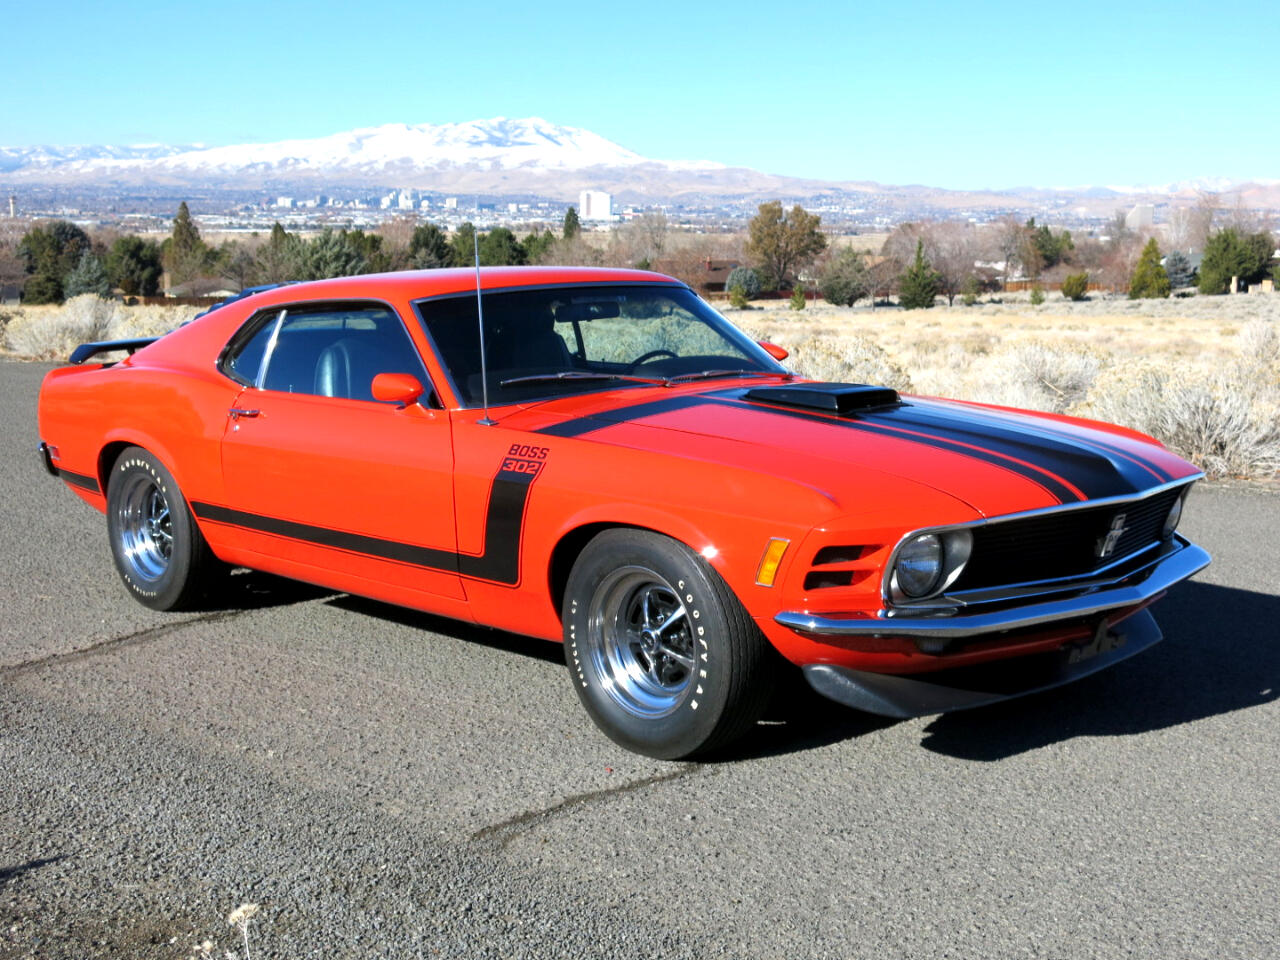 Used 1970 Ford Mustang Boss 302 for Sale in Las Vegas NV 89118 Cool ...